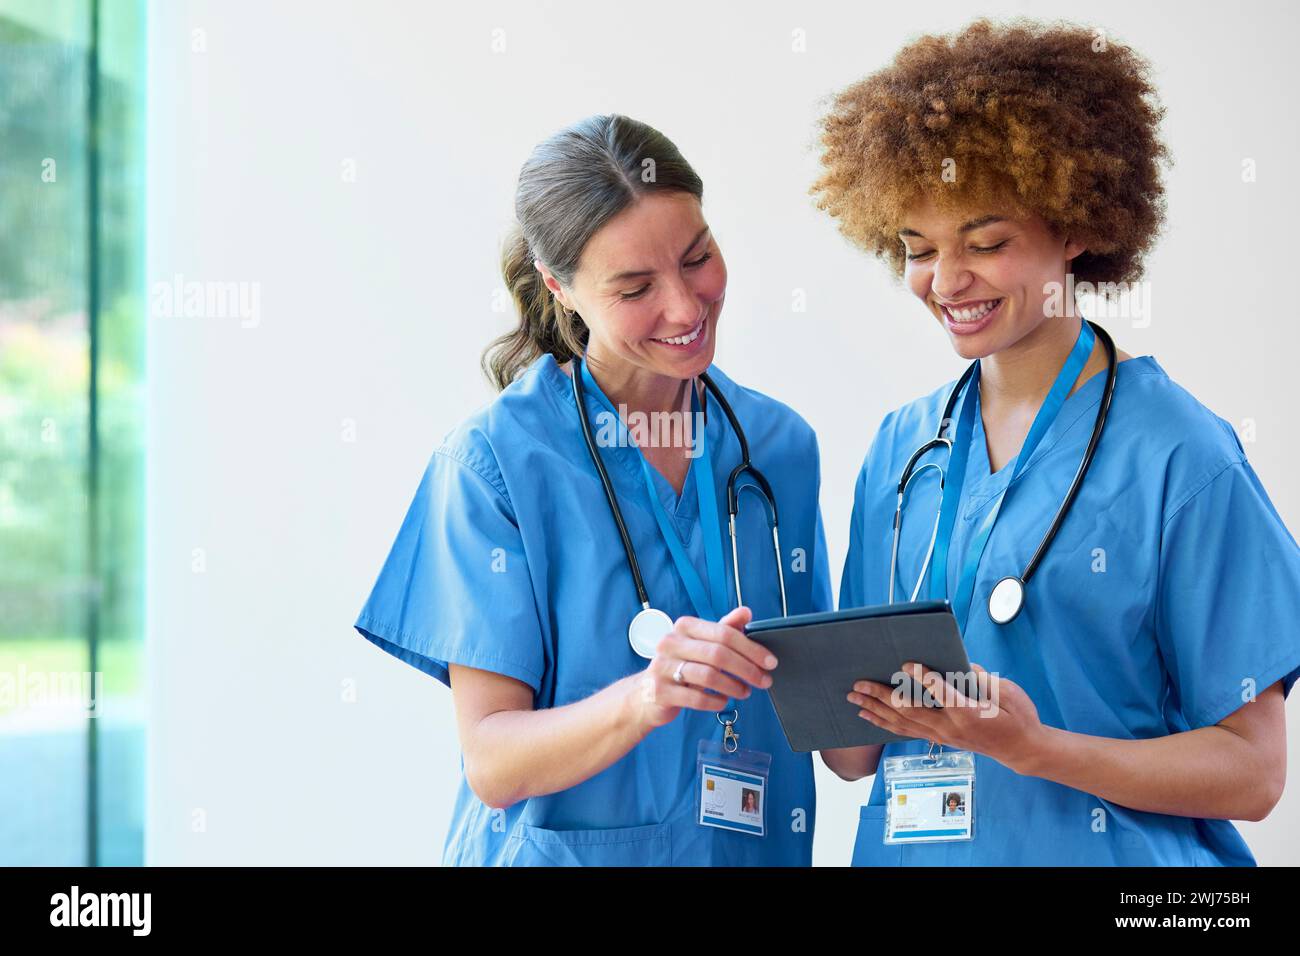 Two Female Doctors Wearing Scrubs With Digital Tablet Discussing Patient Notes In Hospital Stock Photo